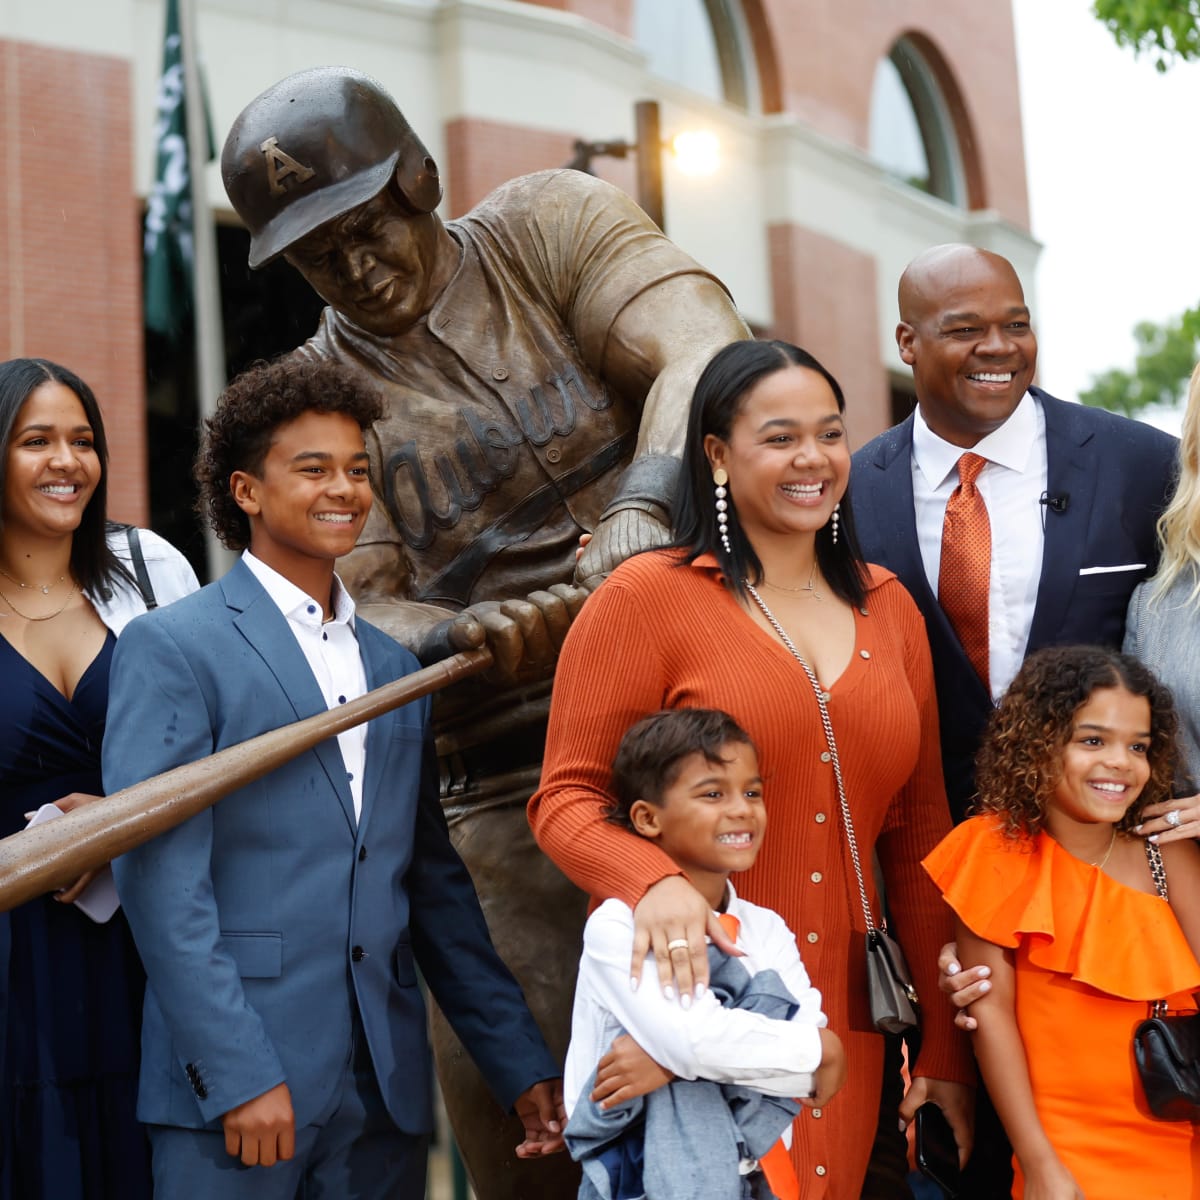 Trustees approve construction of Frank Thomas statue - The Auburn